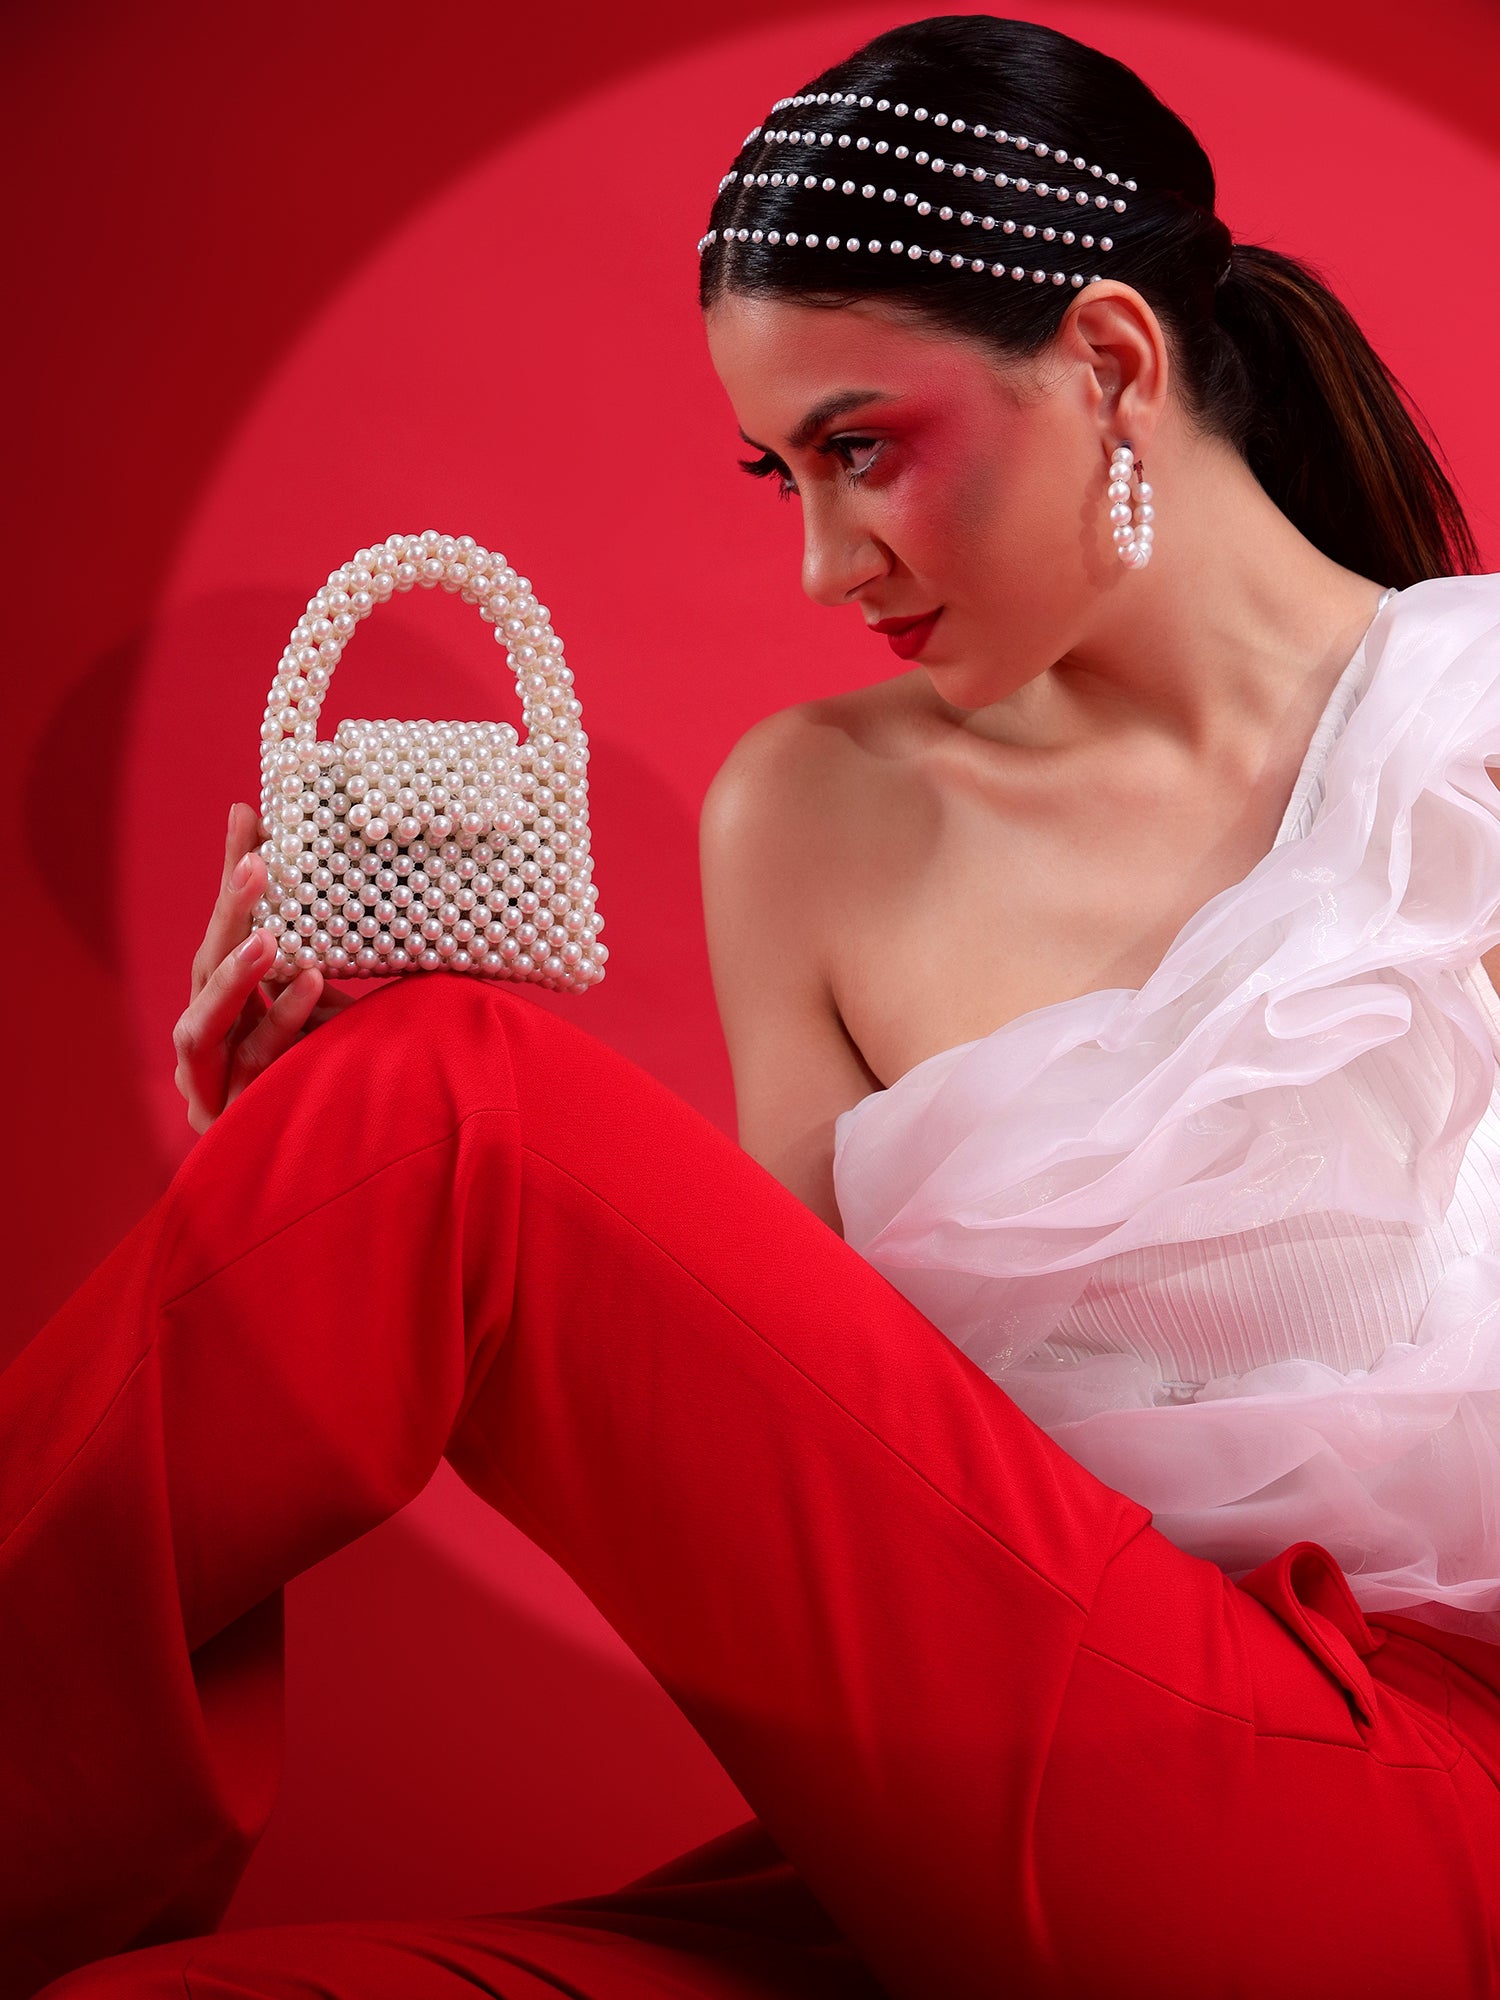 Buy The Minimalist White Clutch Purse Gift Online at ₹2299